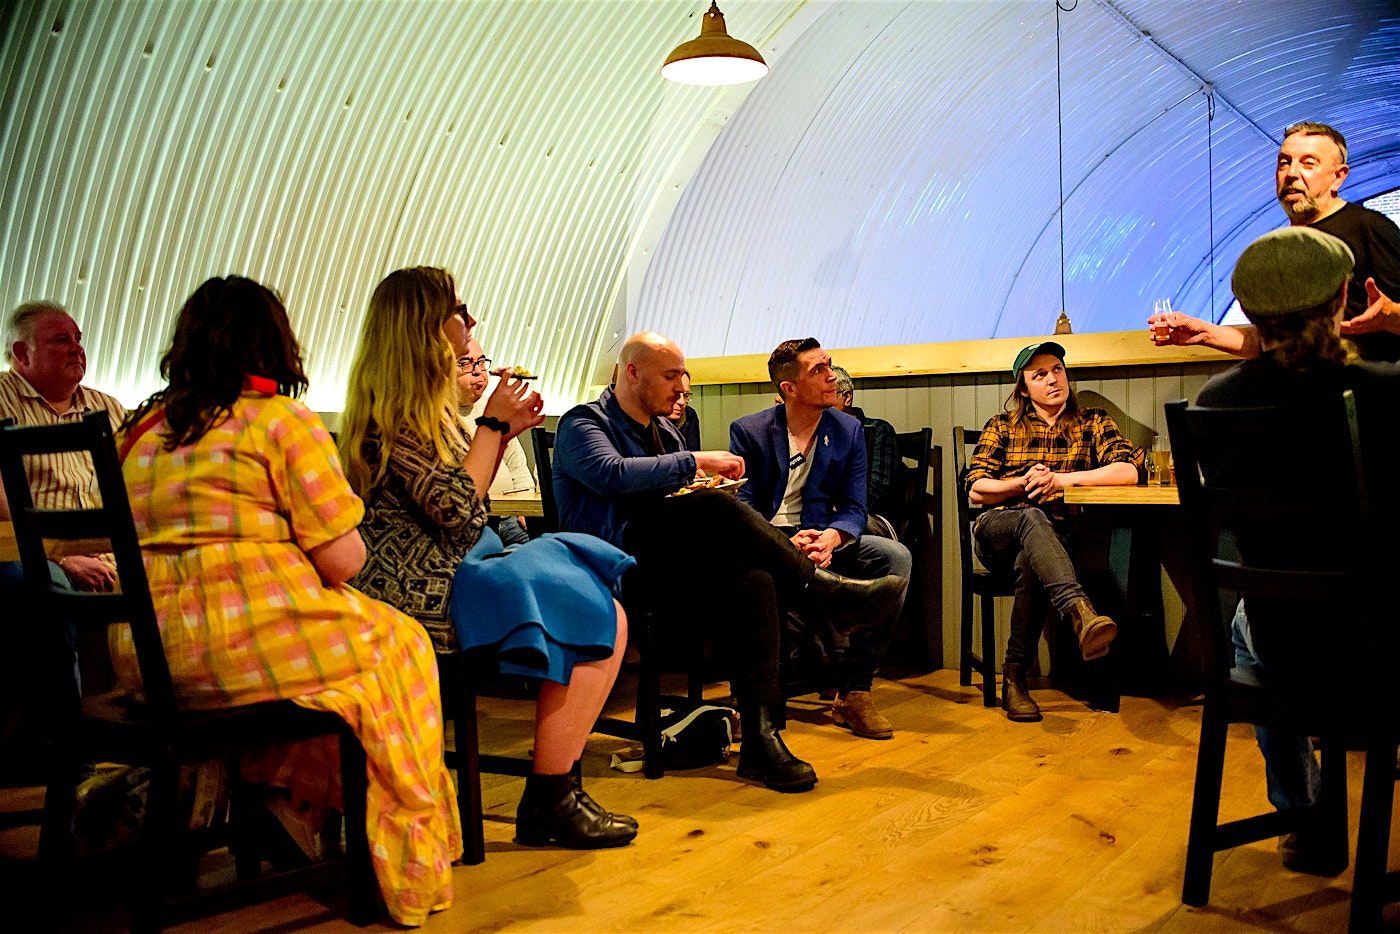 people inside the arch house taproom in bermondsey london